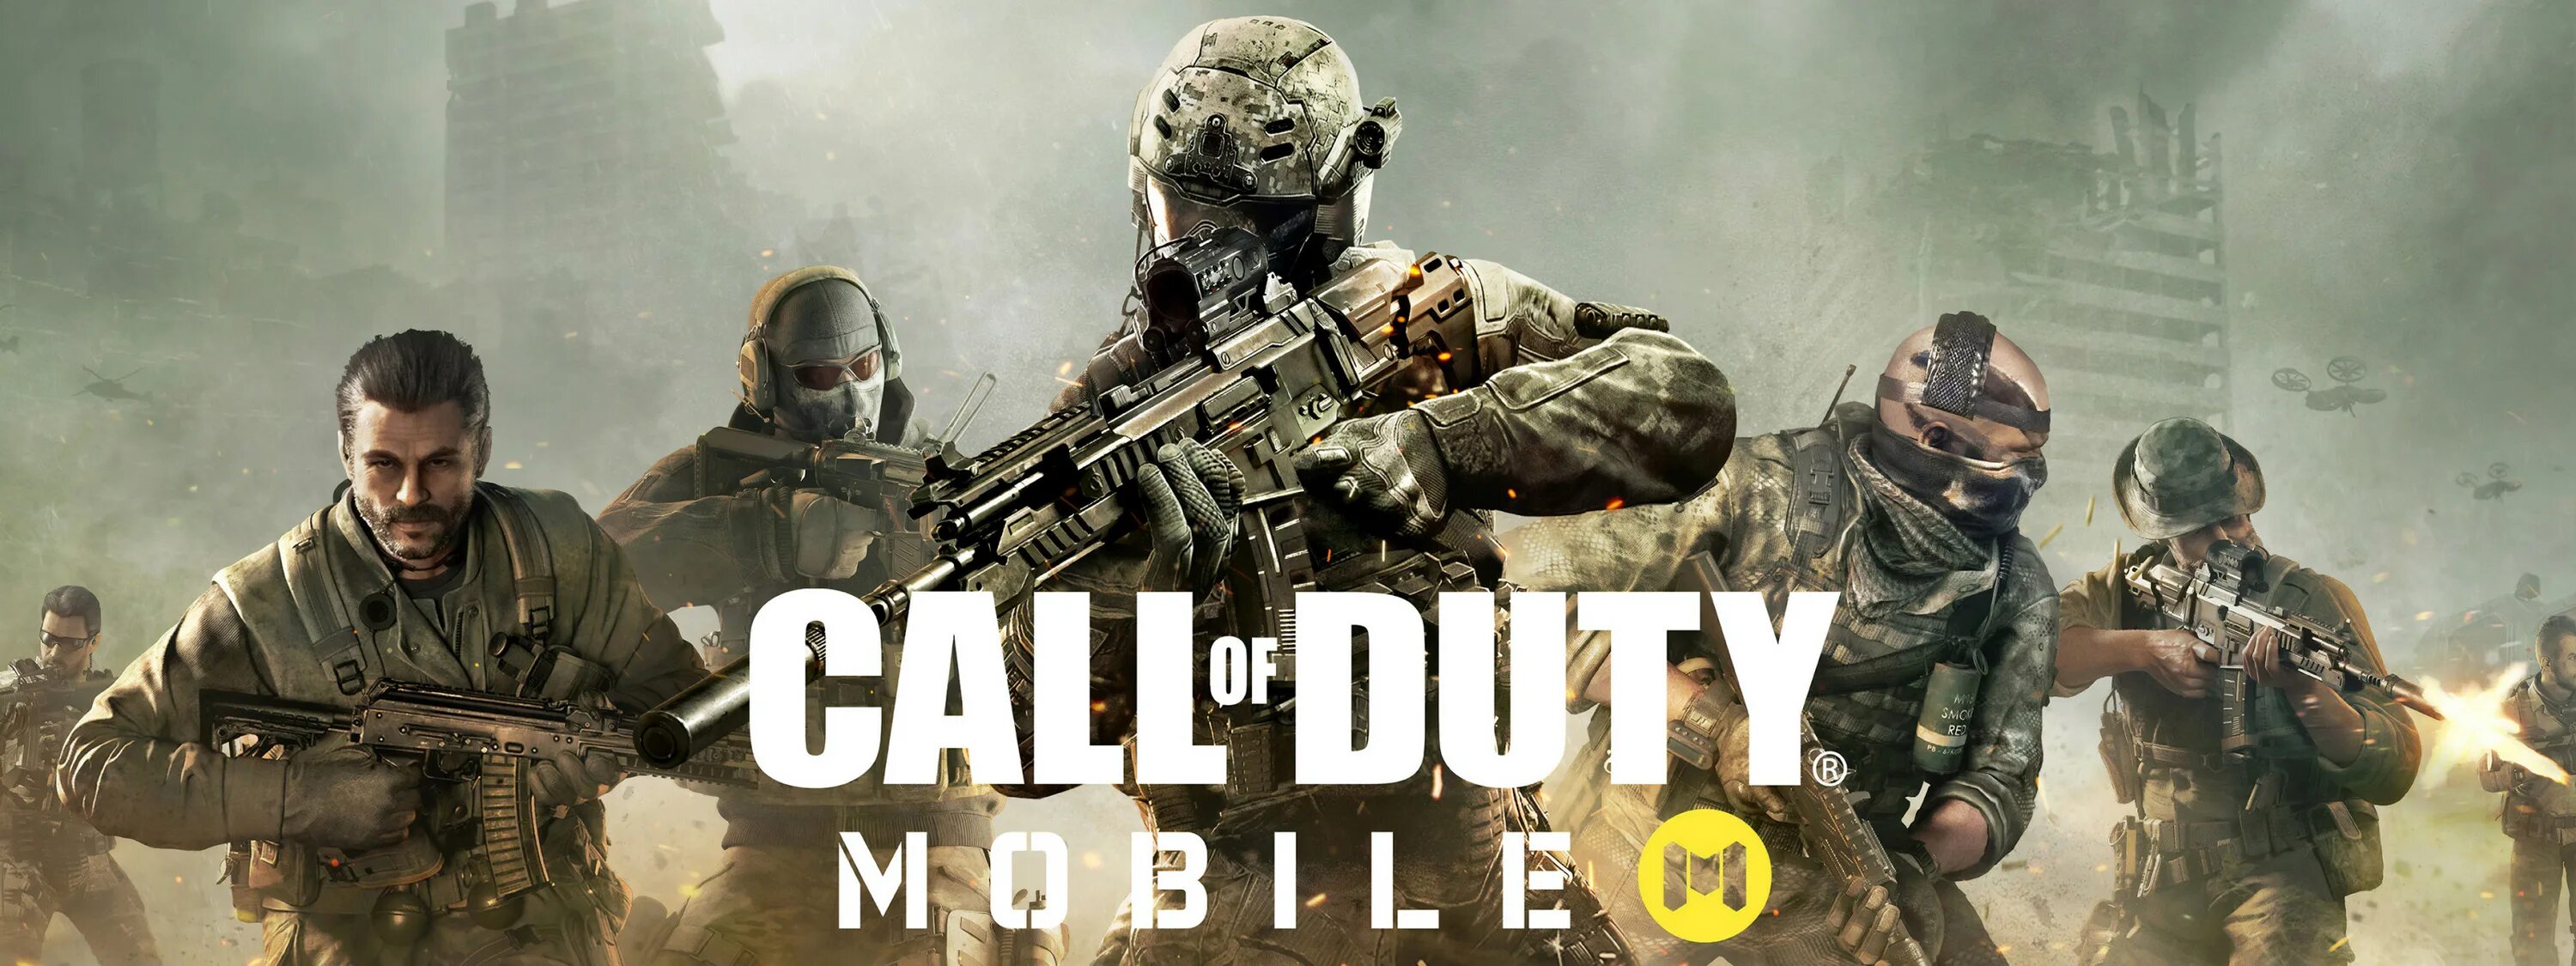 Call of Duty mobile. Call of Duty mobile команда. Никто Call of Duty. Никто Call of Duty mobile.